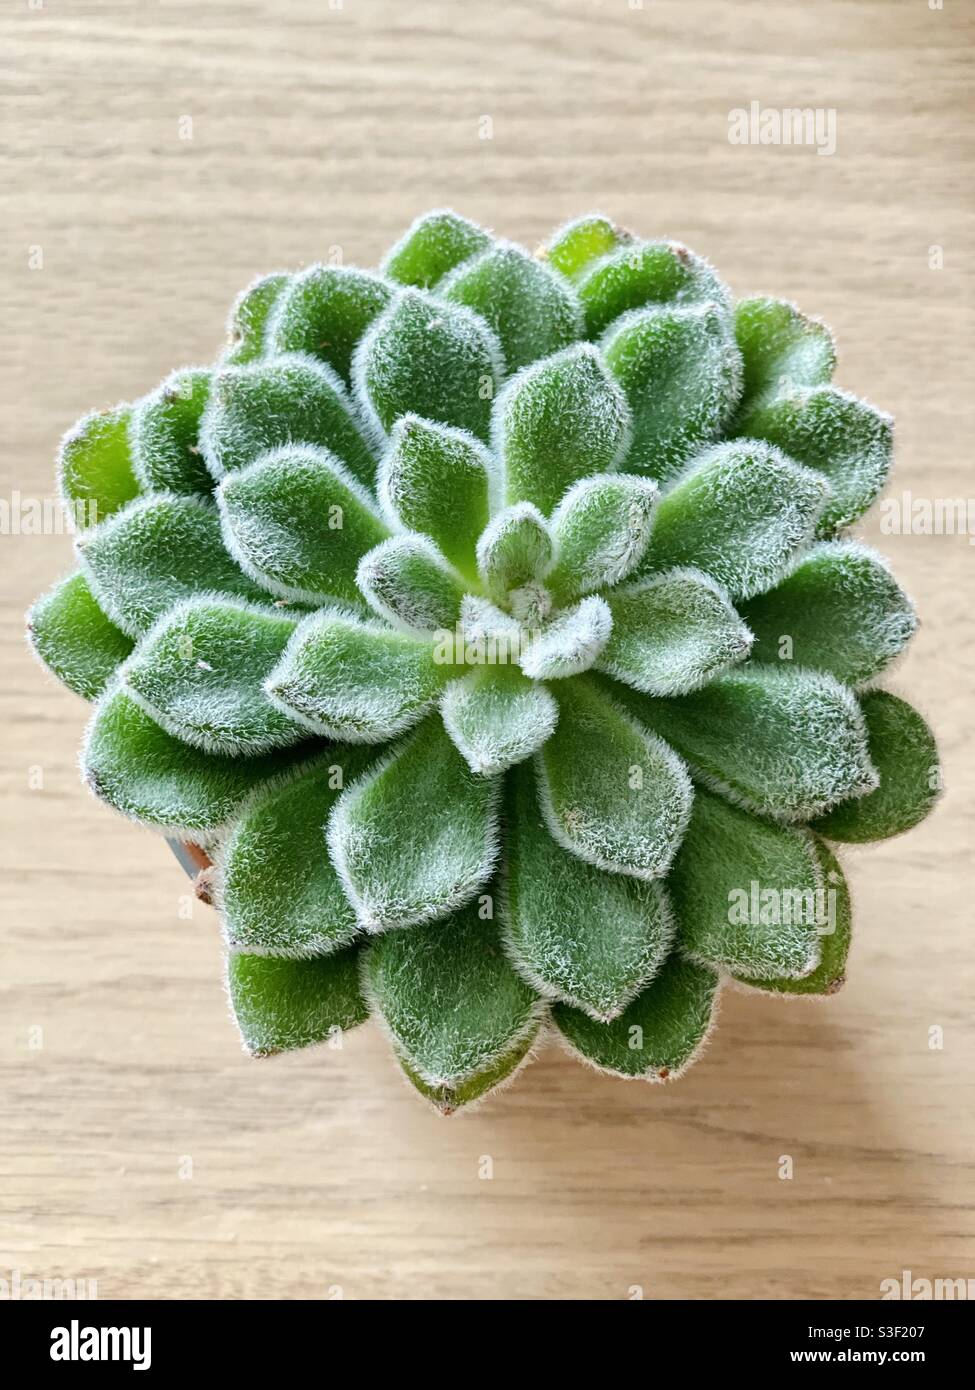 Beautiful green hairy succulent cactus plant pot on a wooden table Stock Photo